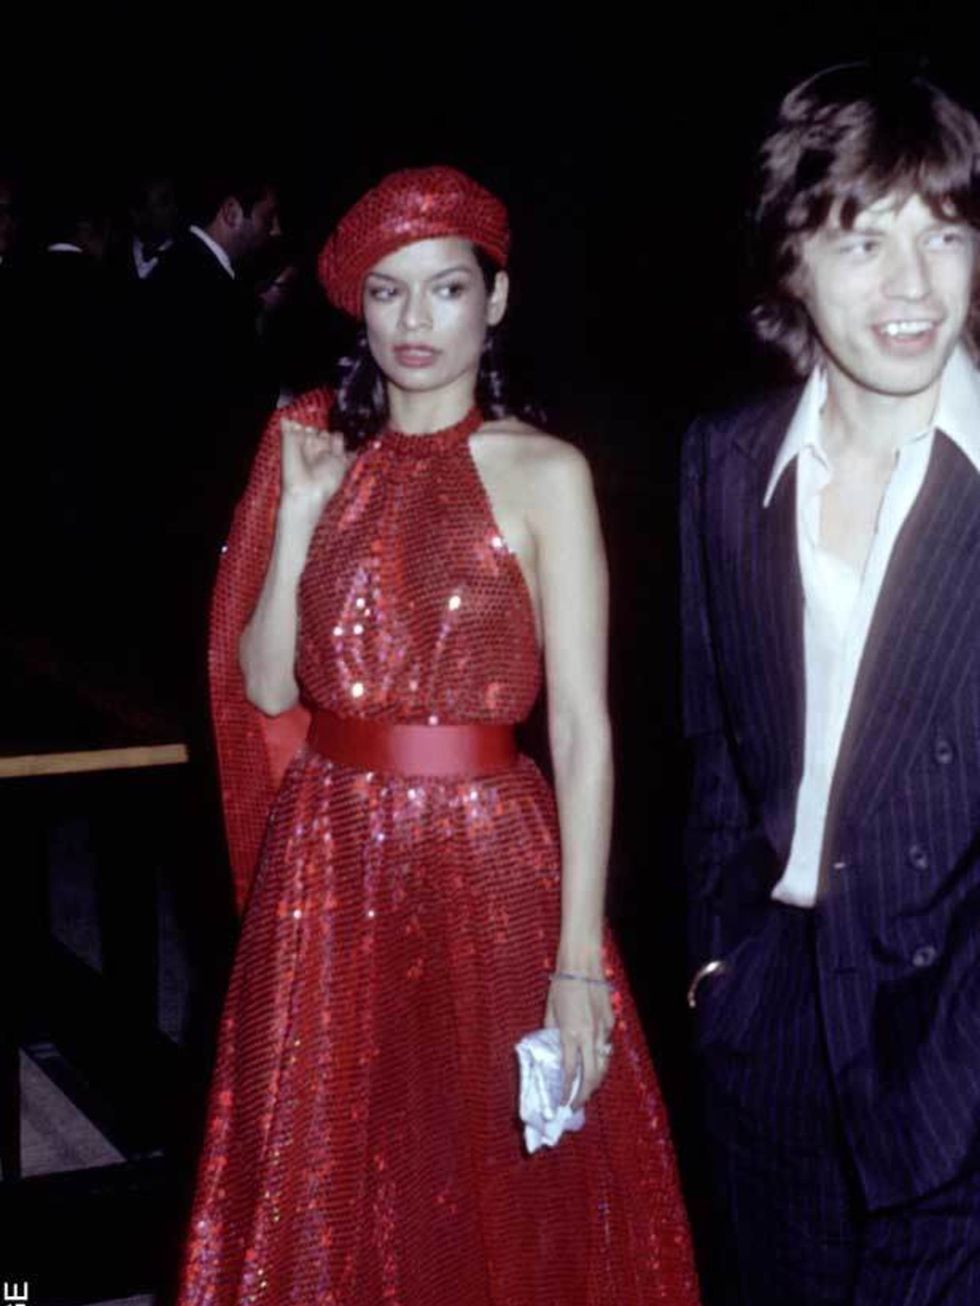 <p>Bianca Pérez-Mora Macias wore a white YSL suit to marry Mick Jagger in St Tropez in 1971, becoming an icon of '70s glamour in the years that followed. The pair split in 1978.</p>